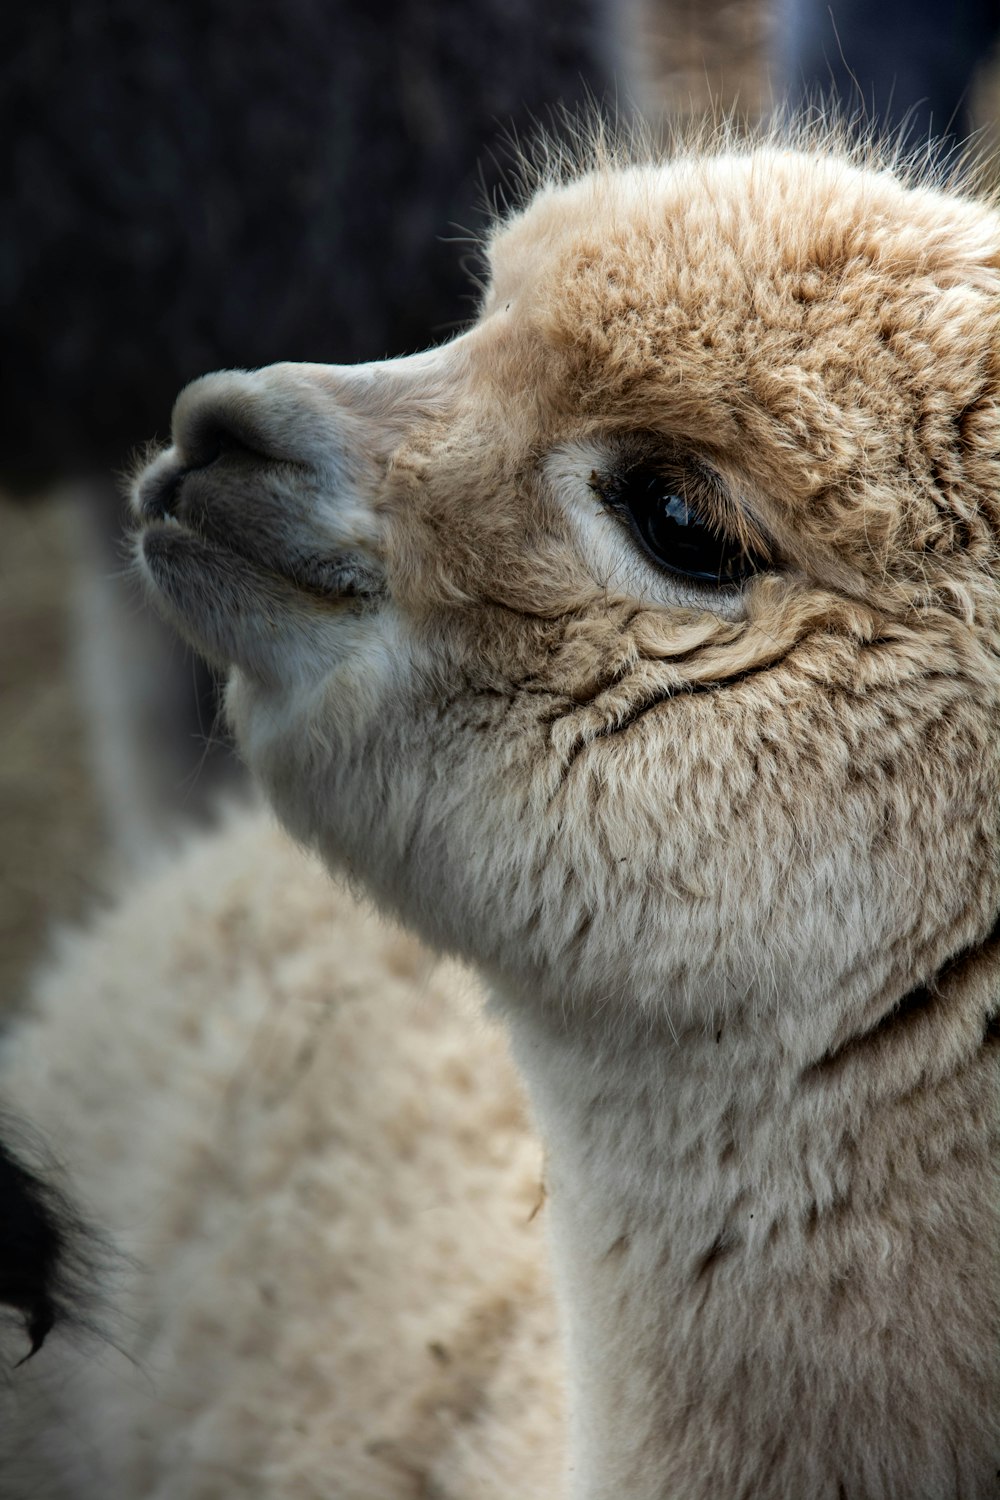 a close up of a llama's face with a blurry background